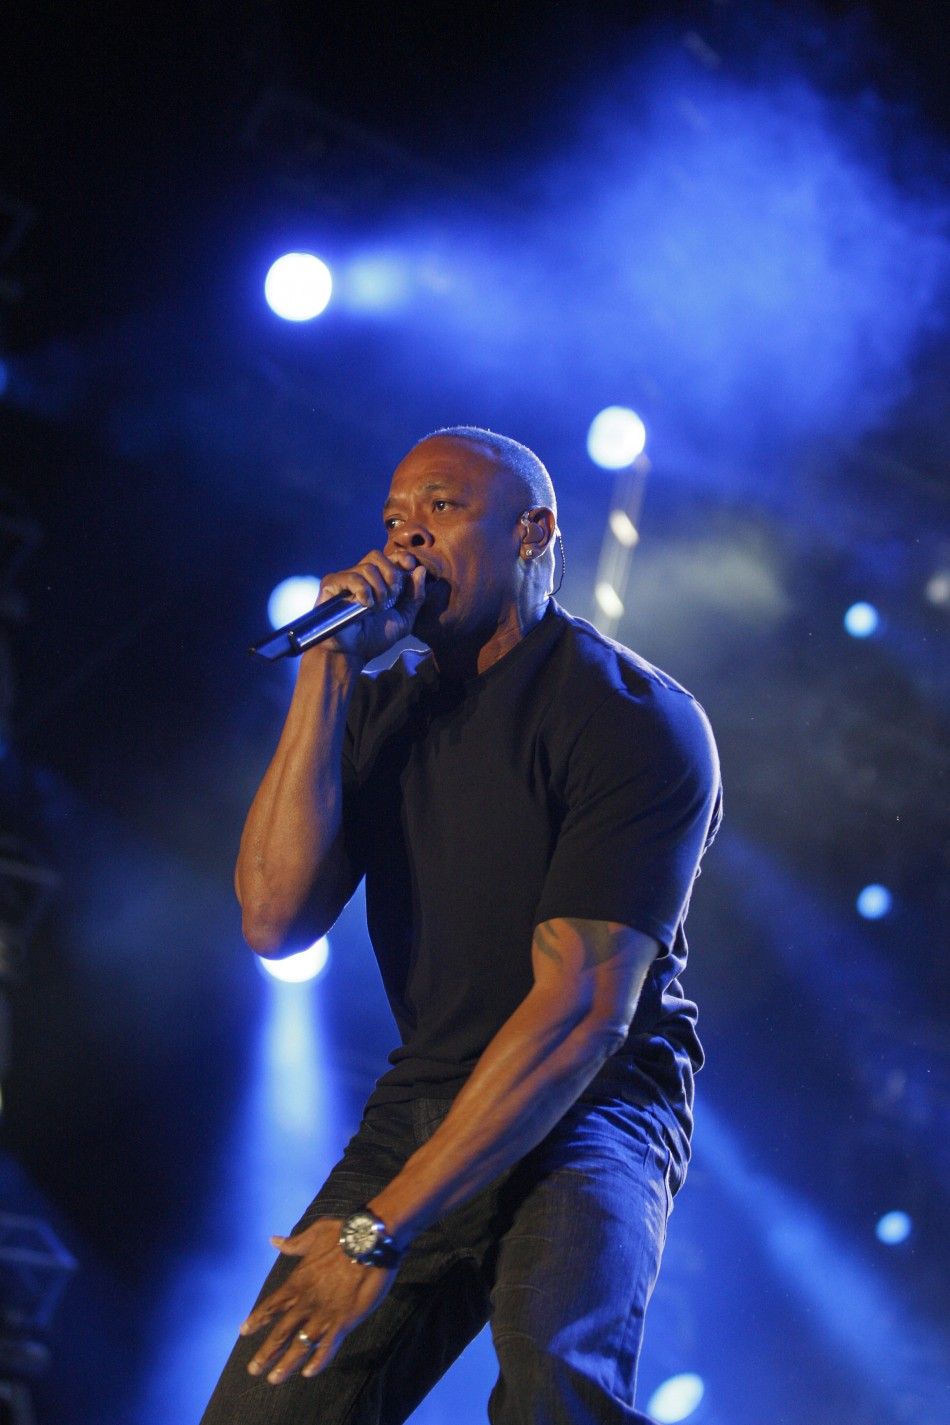 Dr. Dre performs at the Coachella Valley Music and Arts Festival in Indio, California April 15, 2012. 